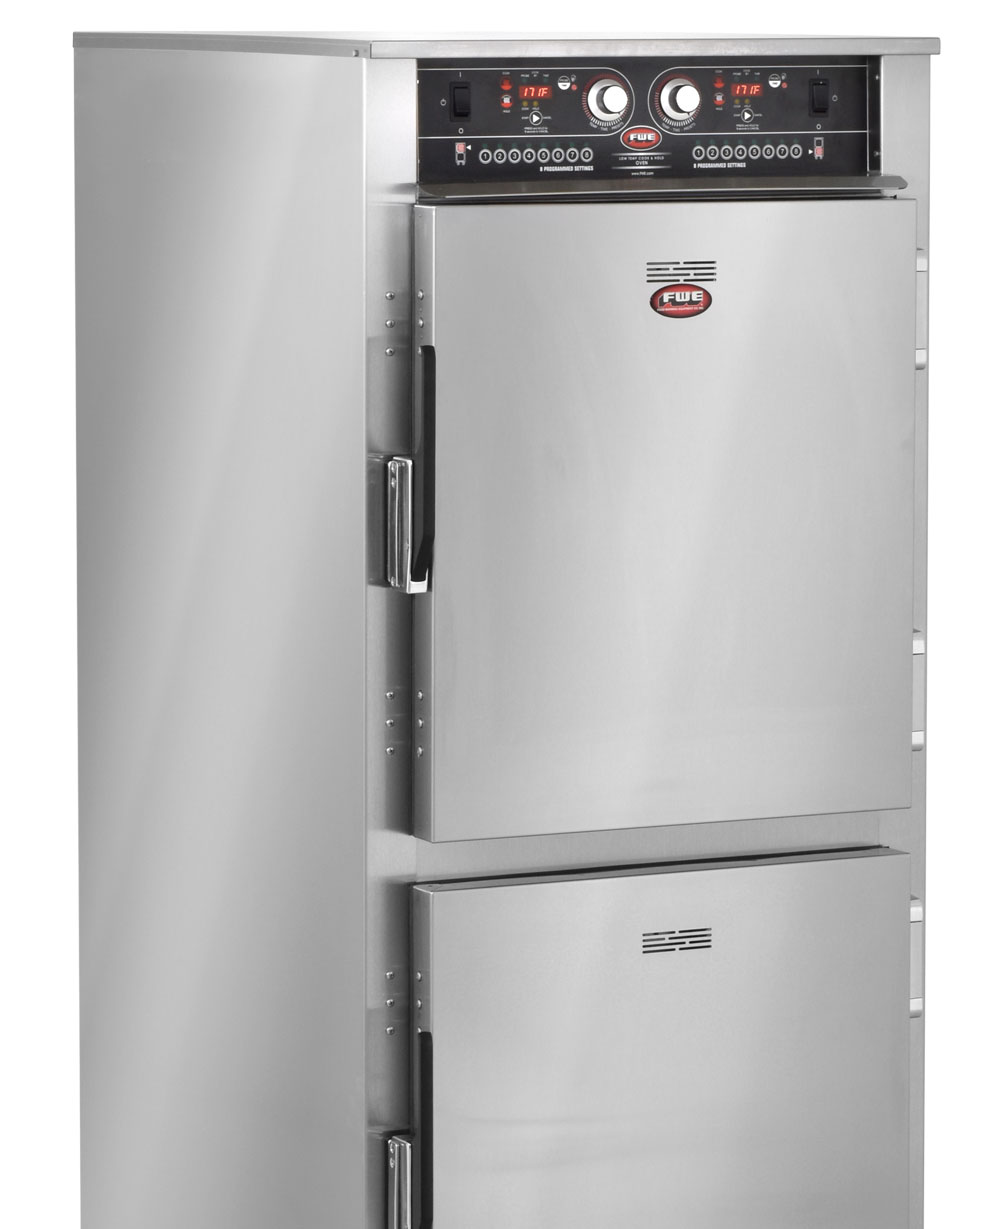 Low Temp Cook & Hold Ovens from Food Warming Equipment Company, Inc.